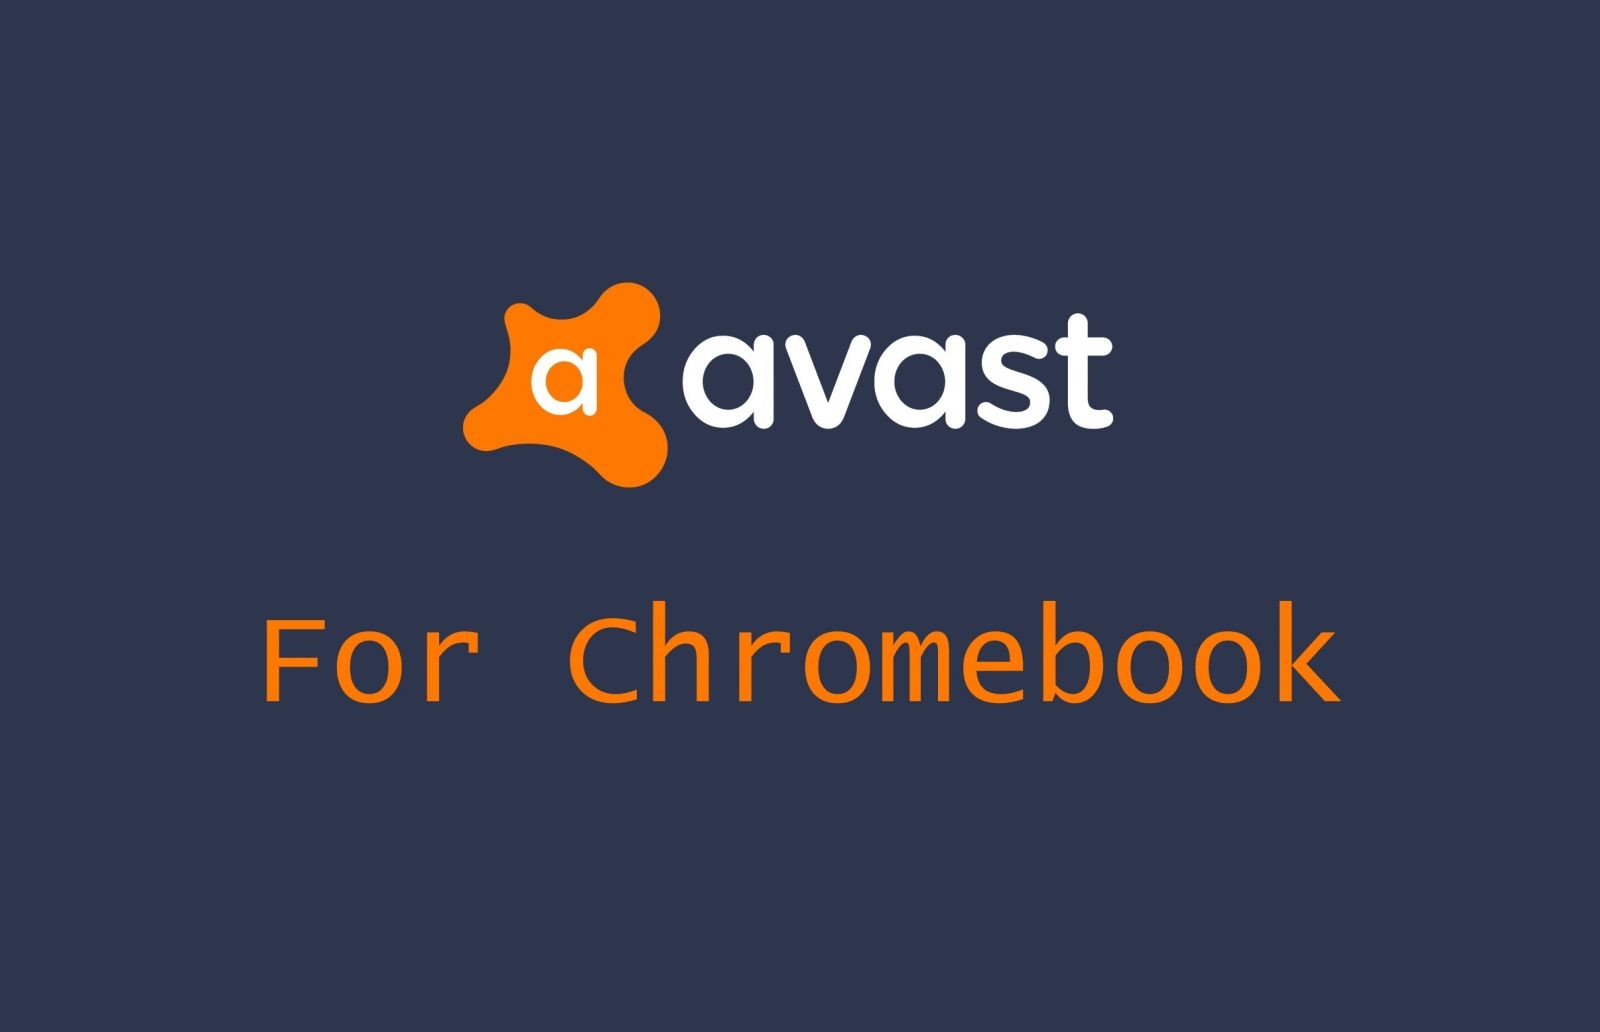 how to enable avast browser extension in chrom